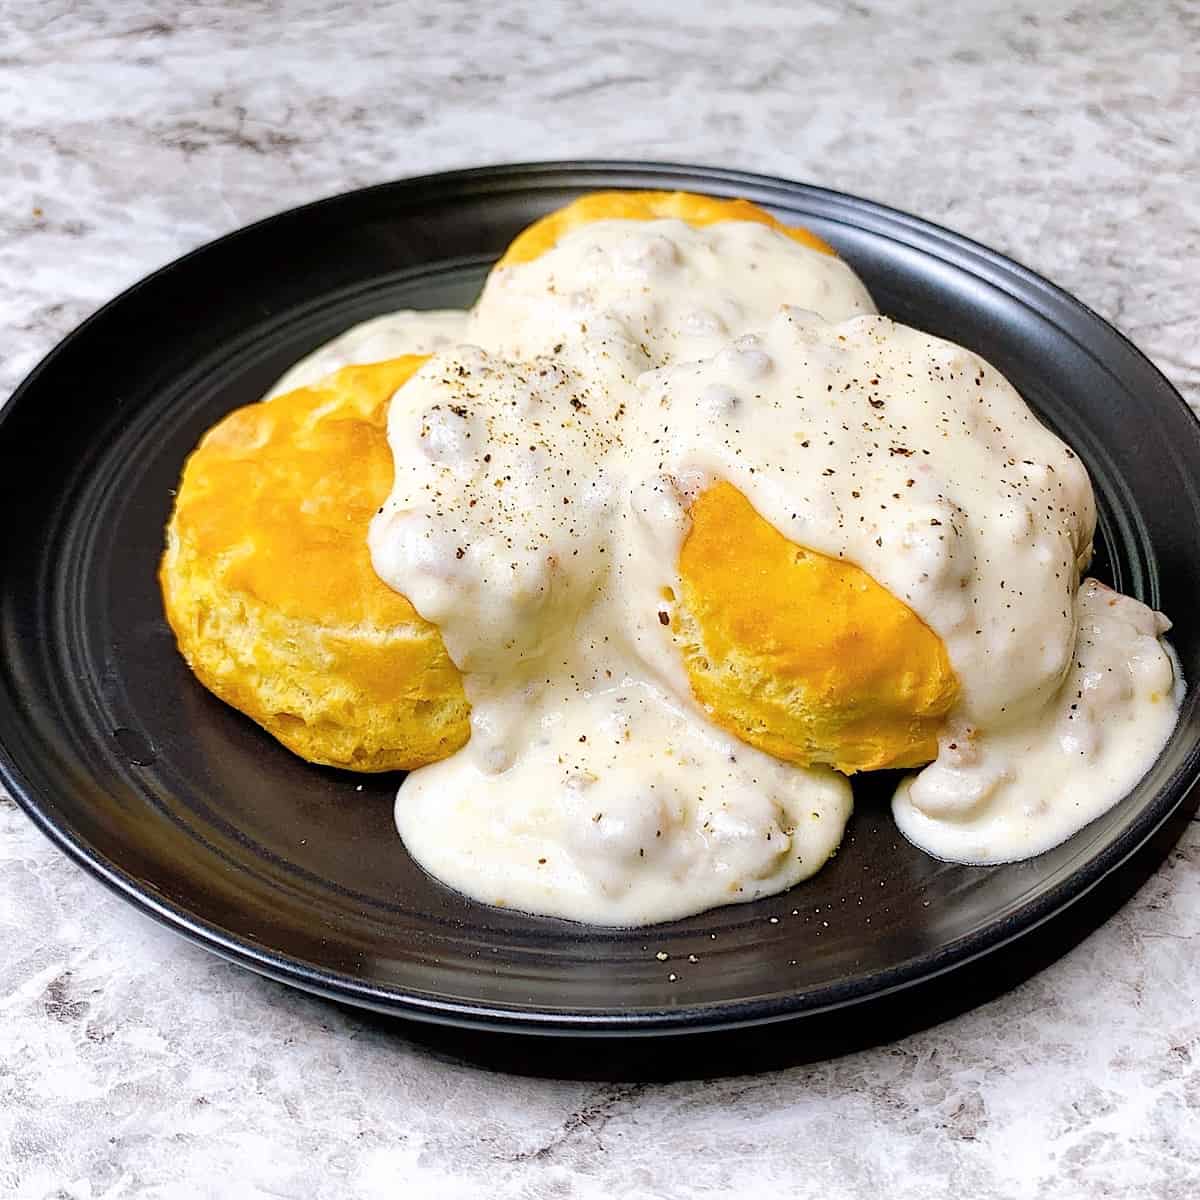 Biscuits on a black plate drenched in sausage gravy